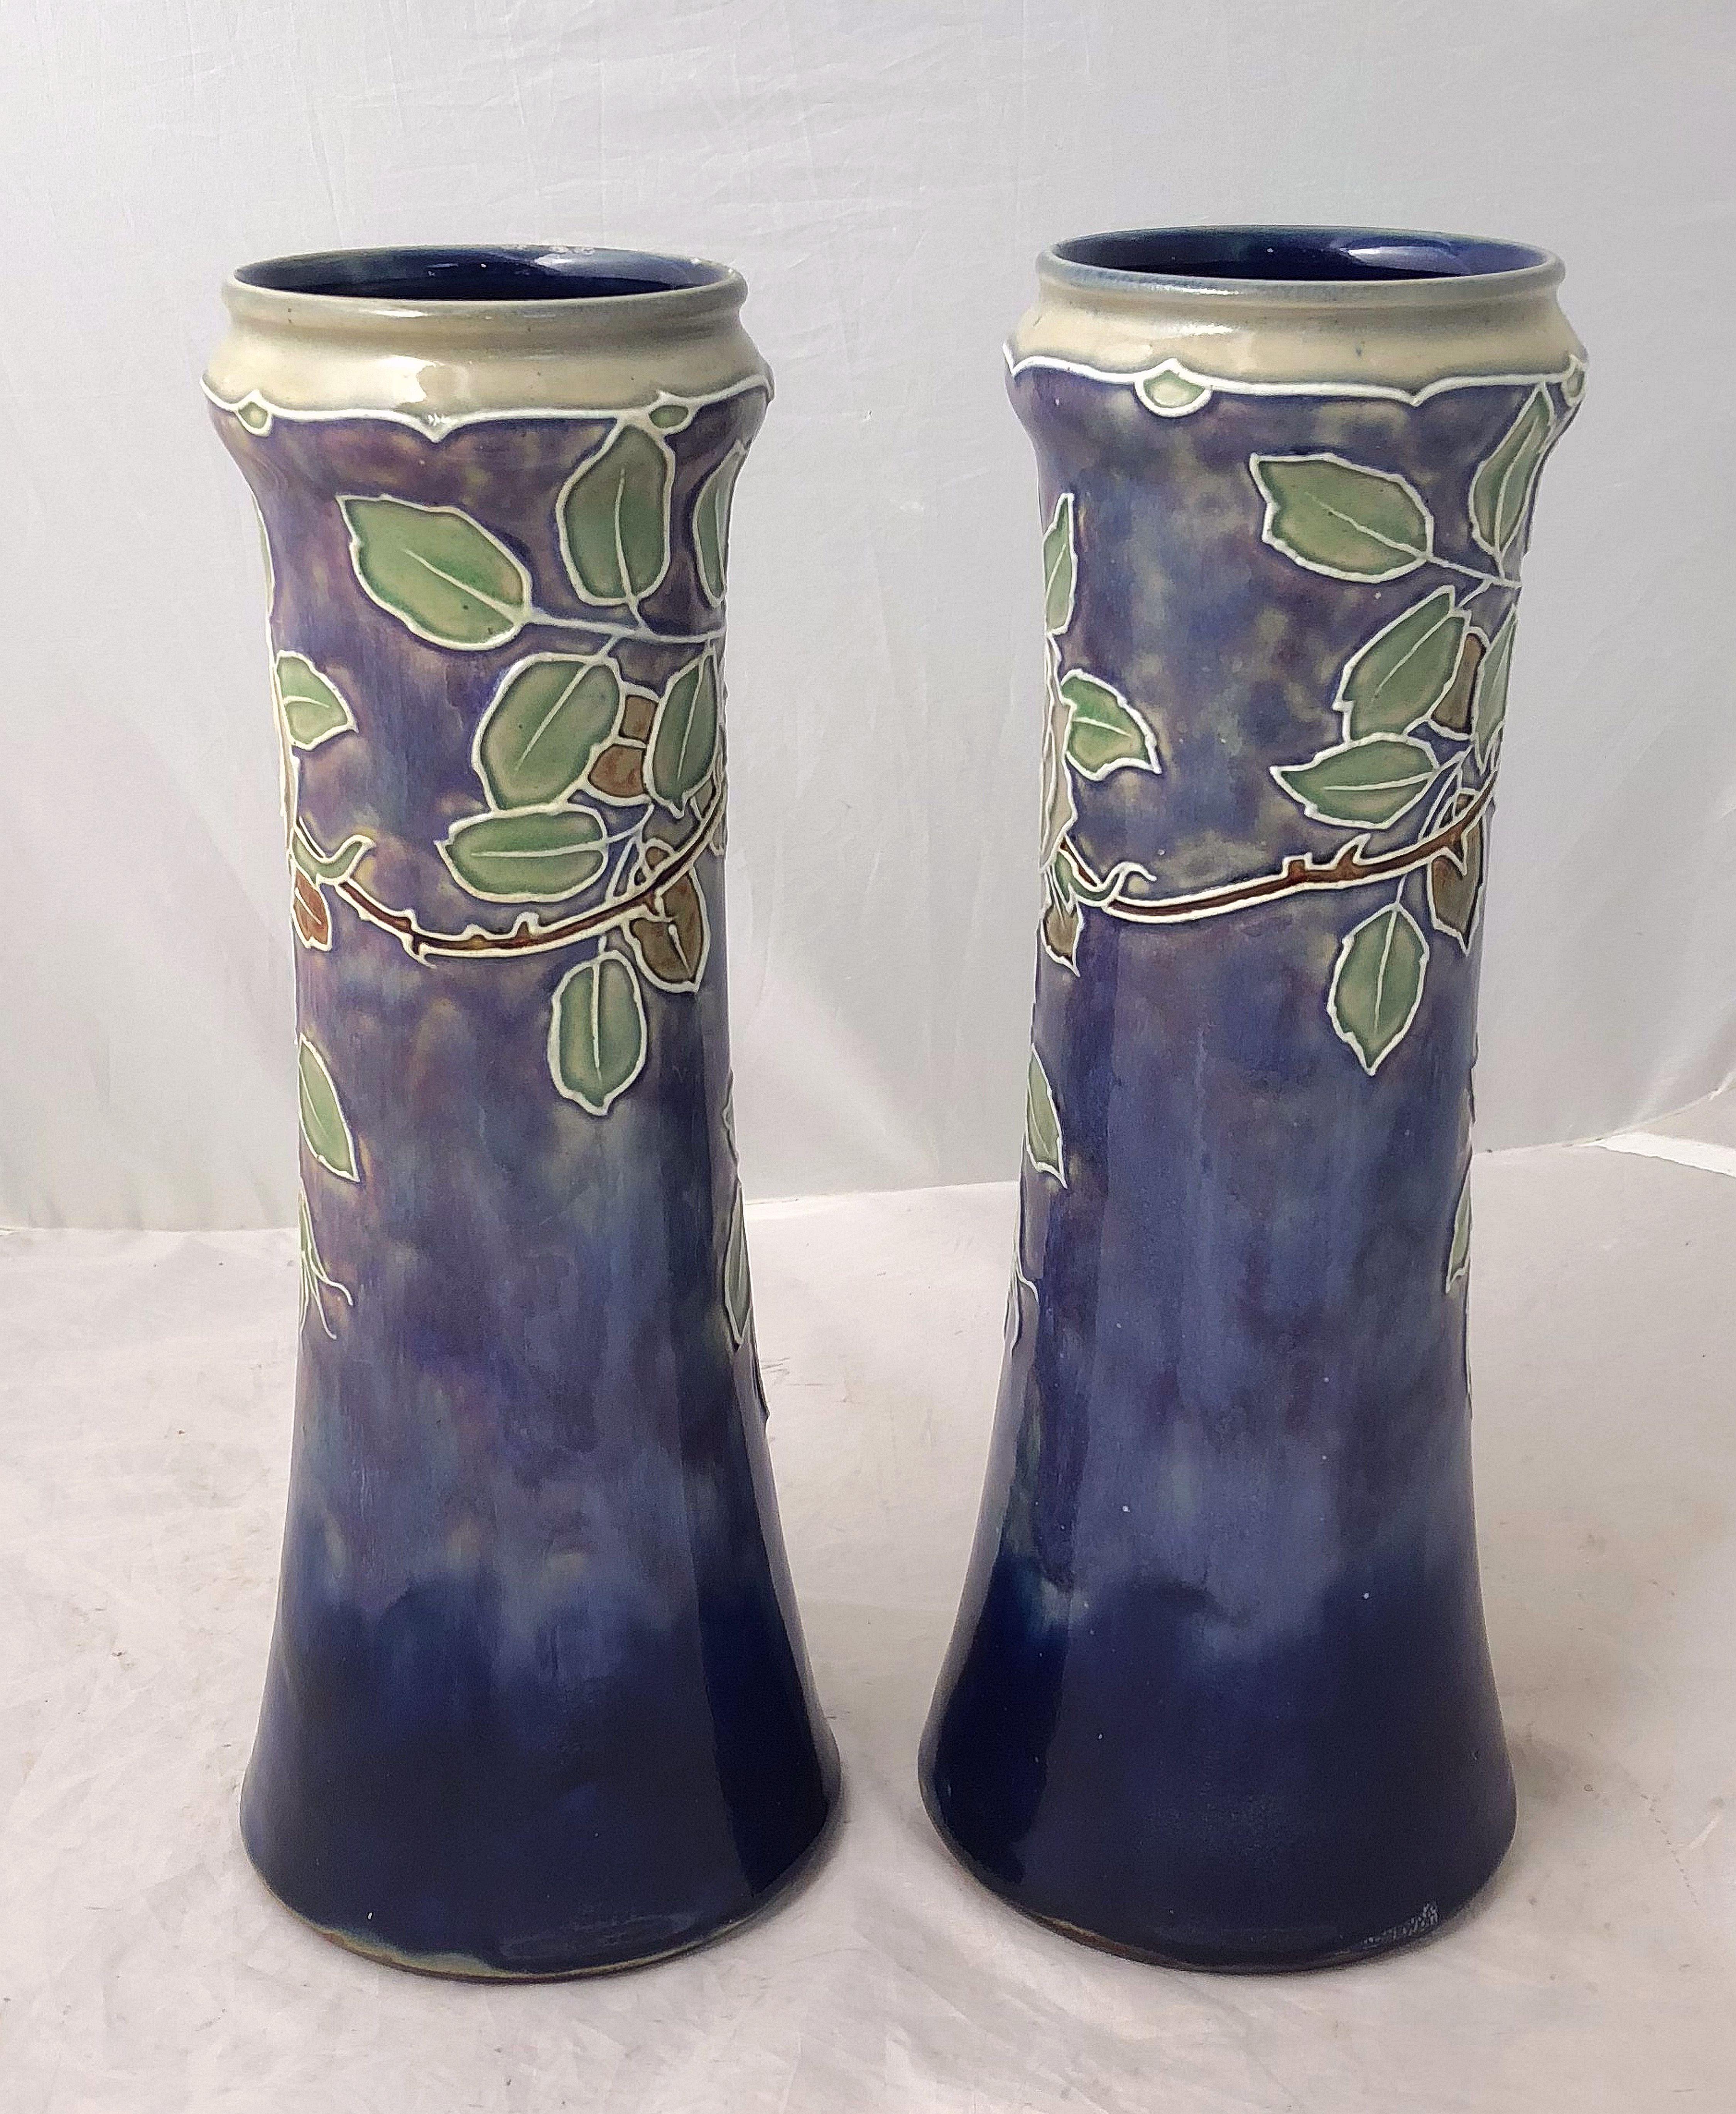 English Pair of Royal Doulton Vases from the Arts & Crafts Period, 'Priced as a Pair' For Sale